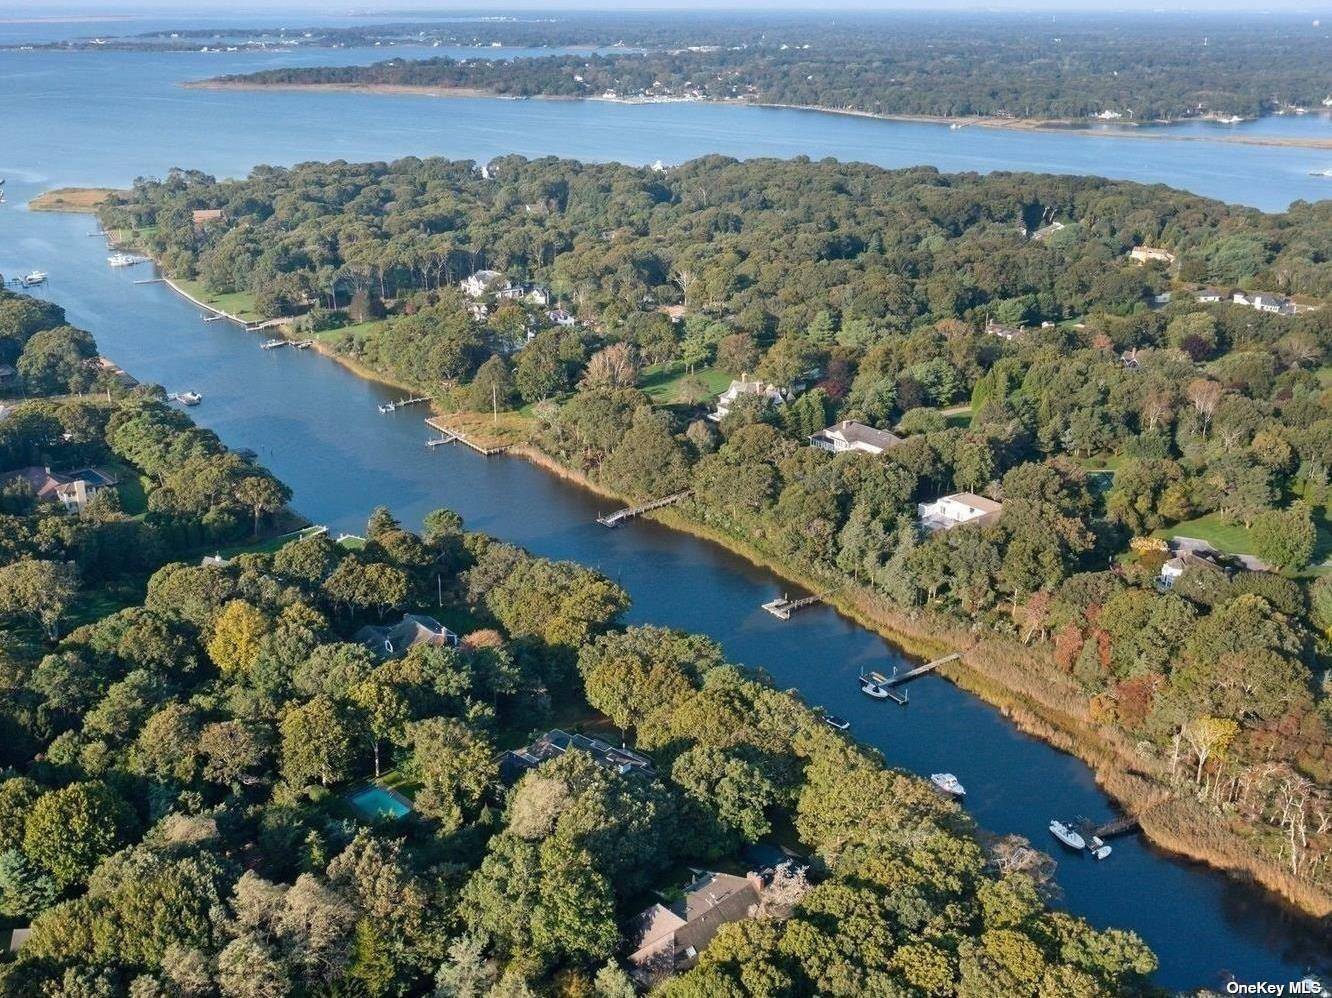 This waterfront home is situated on Fish Creek with access to Moriches Bay.